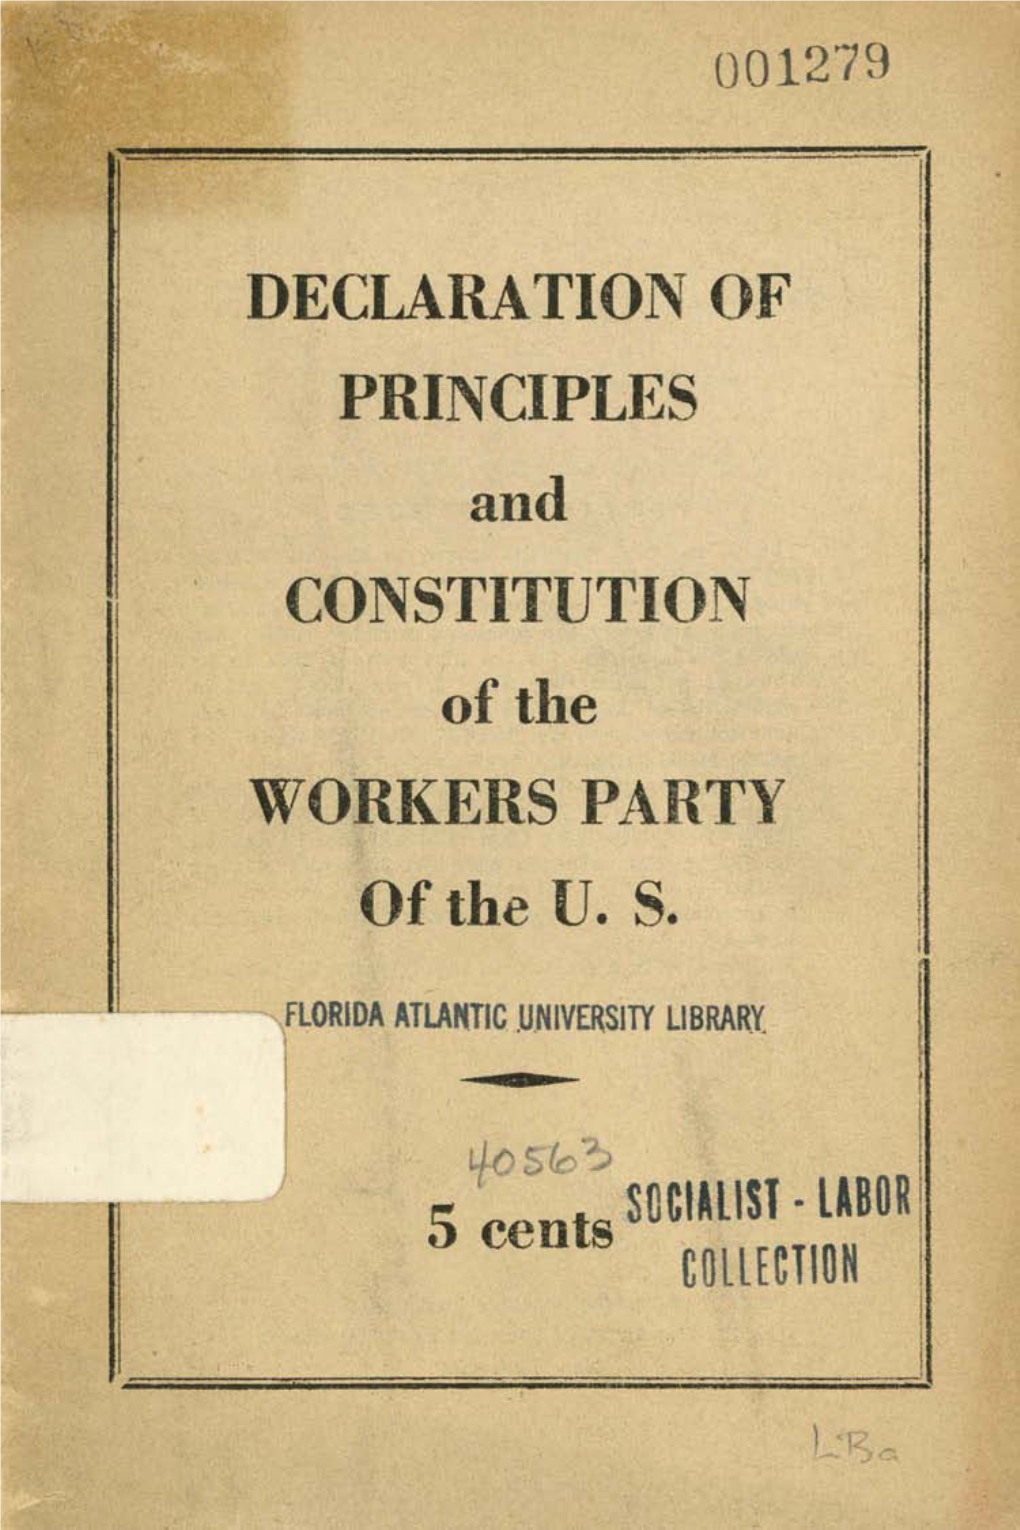 DECLARATION of PRINCIPLES CONSTITUTION of the WORKERS